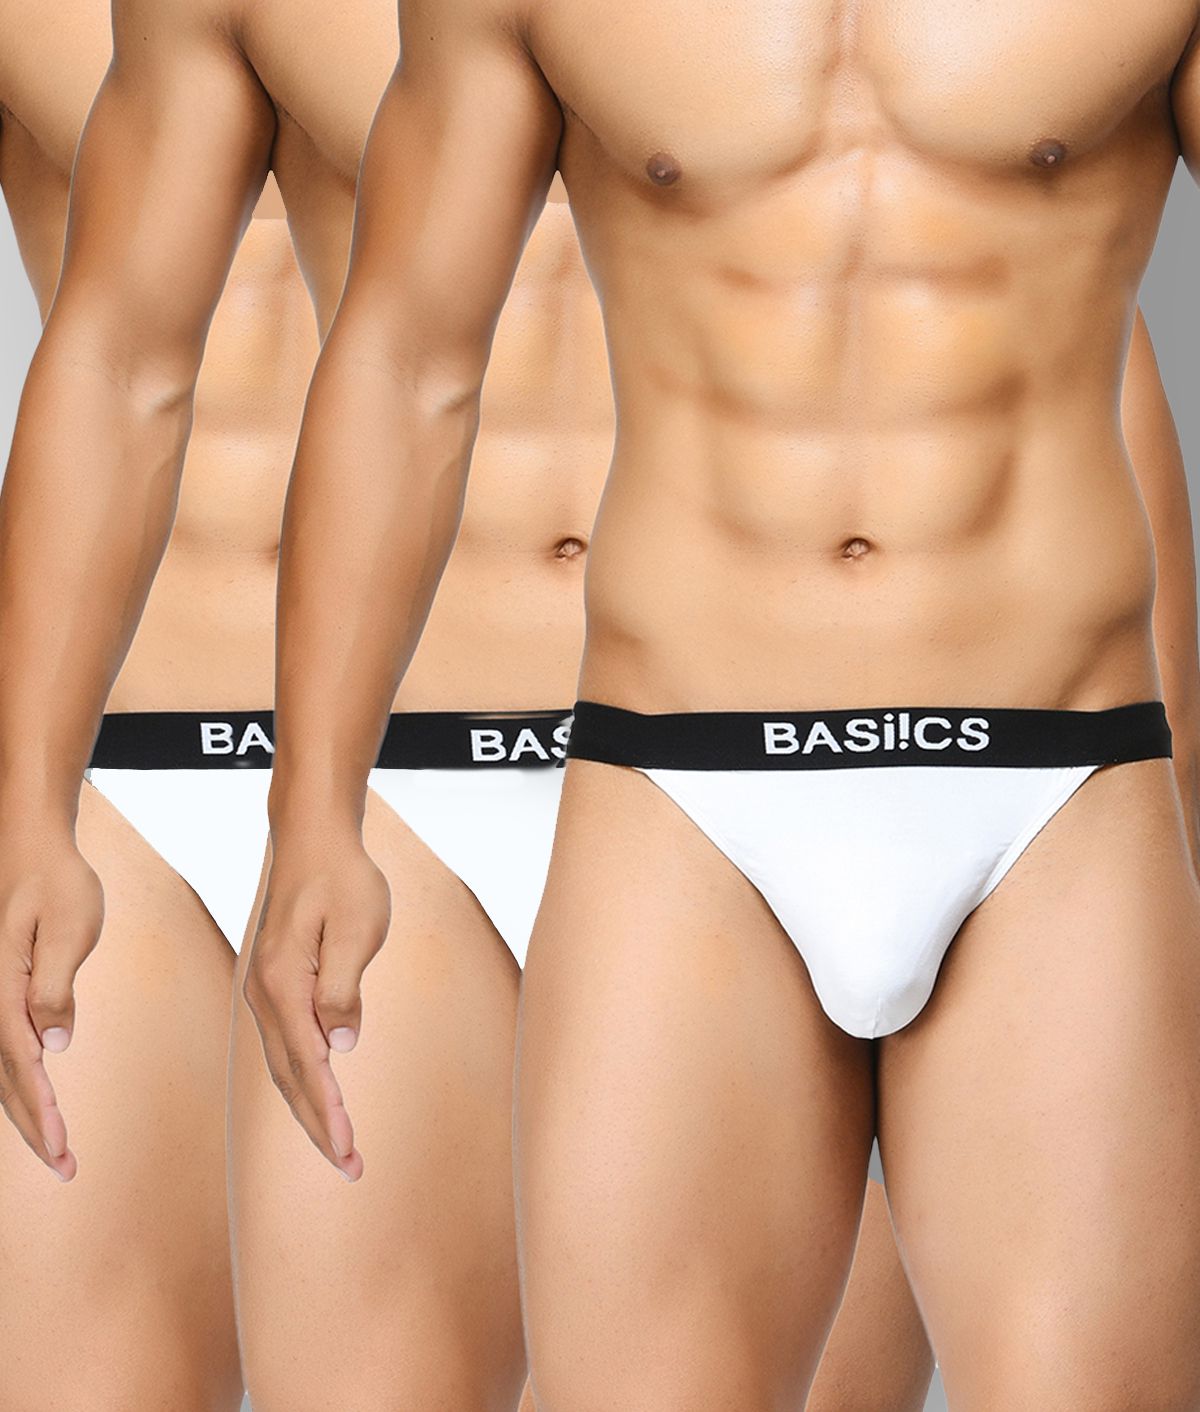     			BASIICS By La Intimo - White Cotton Men's Thongs ( Pack of 3 )